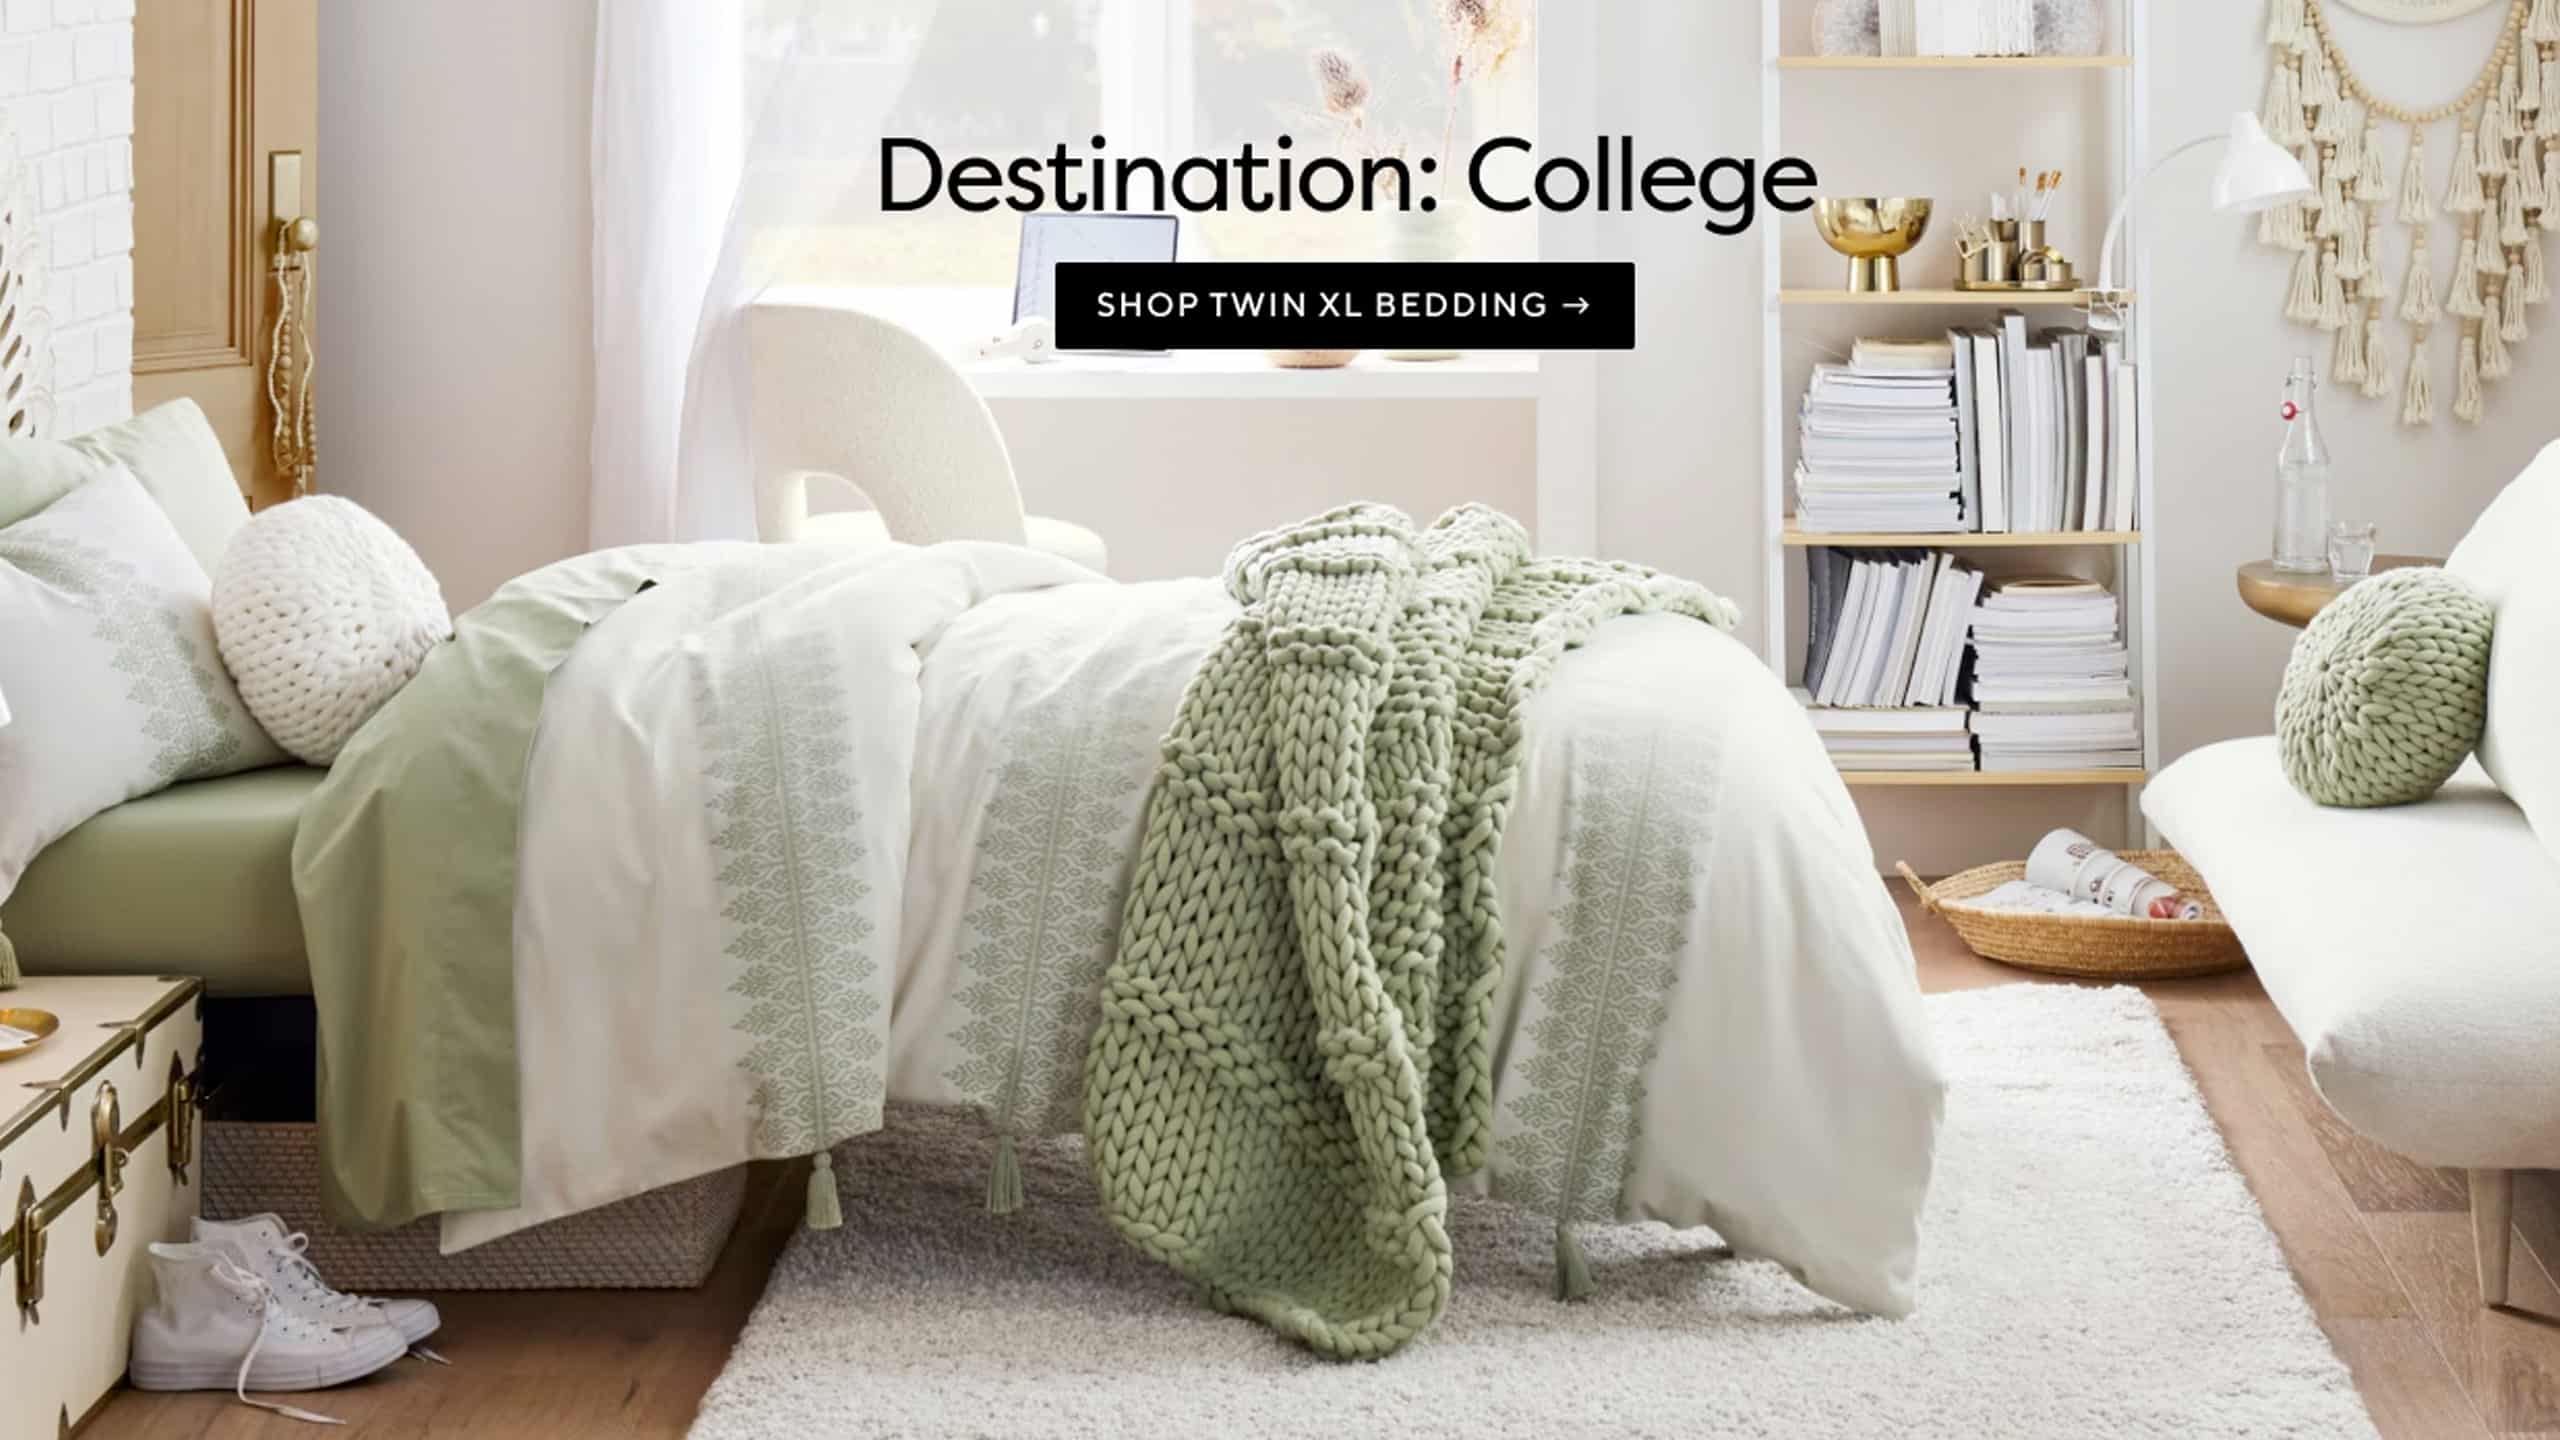 Pottery Barn Teen And Pottery Barn Kids Launch A Vintage-Inspired  Collection With LoveShackFancy